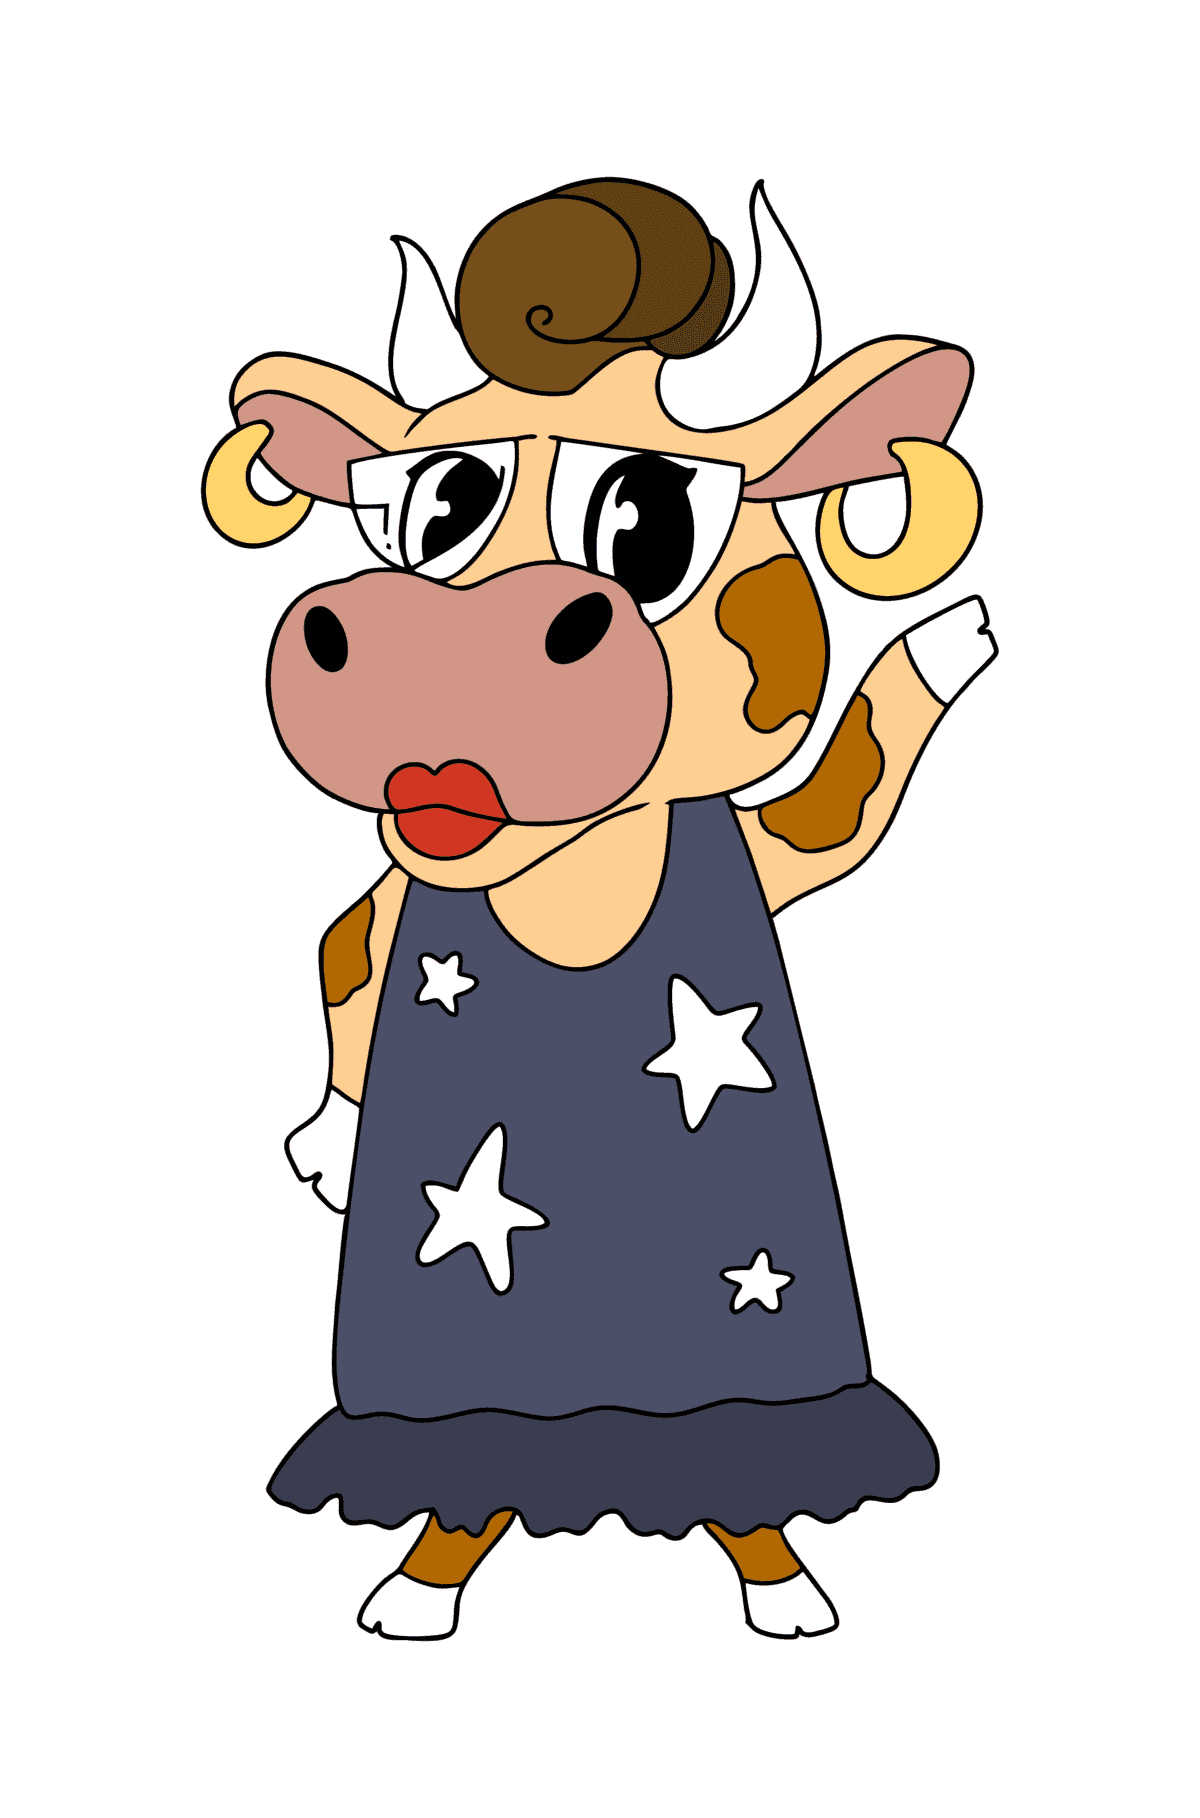 Cartoon cow standing up coloring page - Coloring Pages for Kids